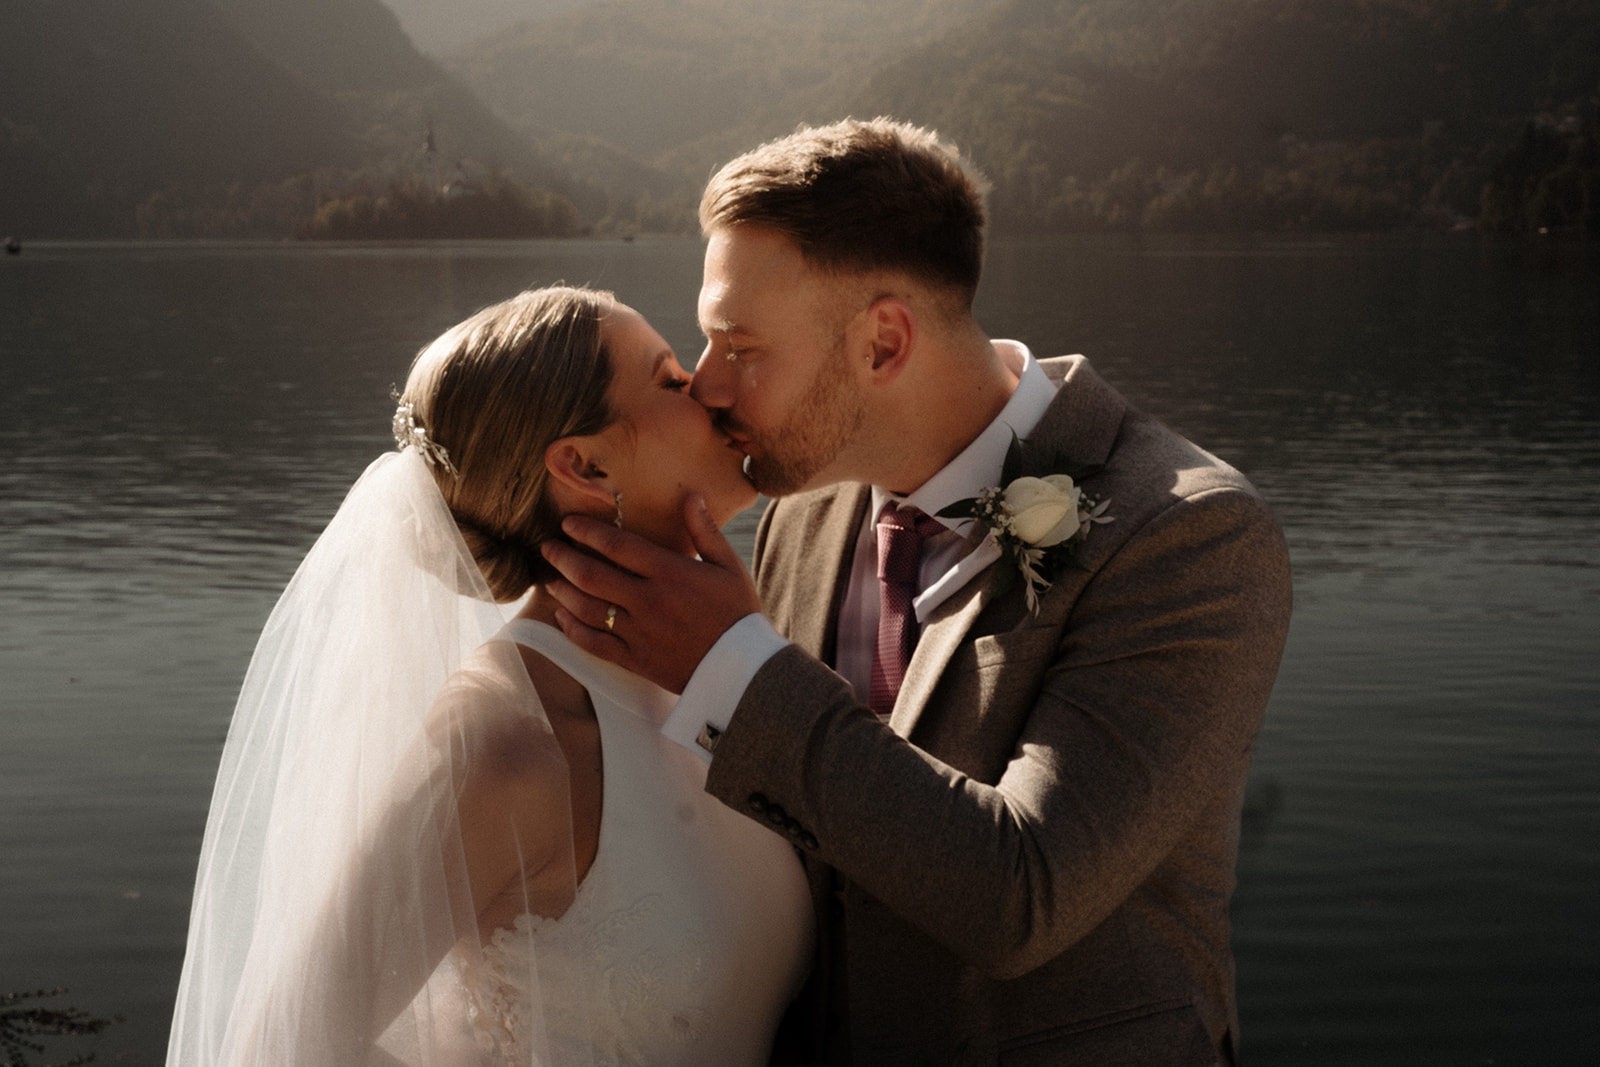 Bride and Groom share a moment of romance with Lake Bled in the background